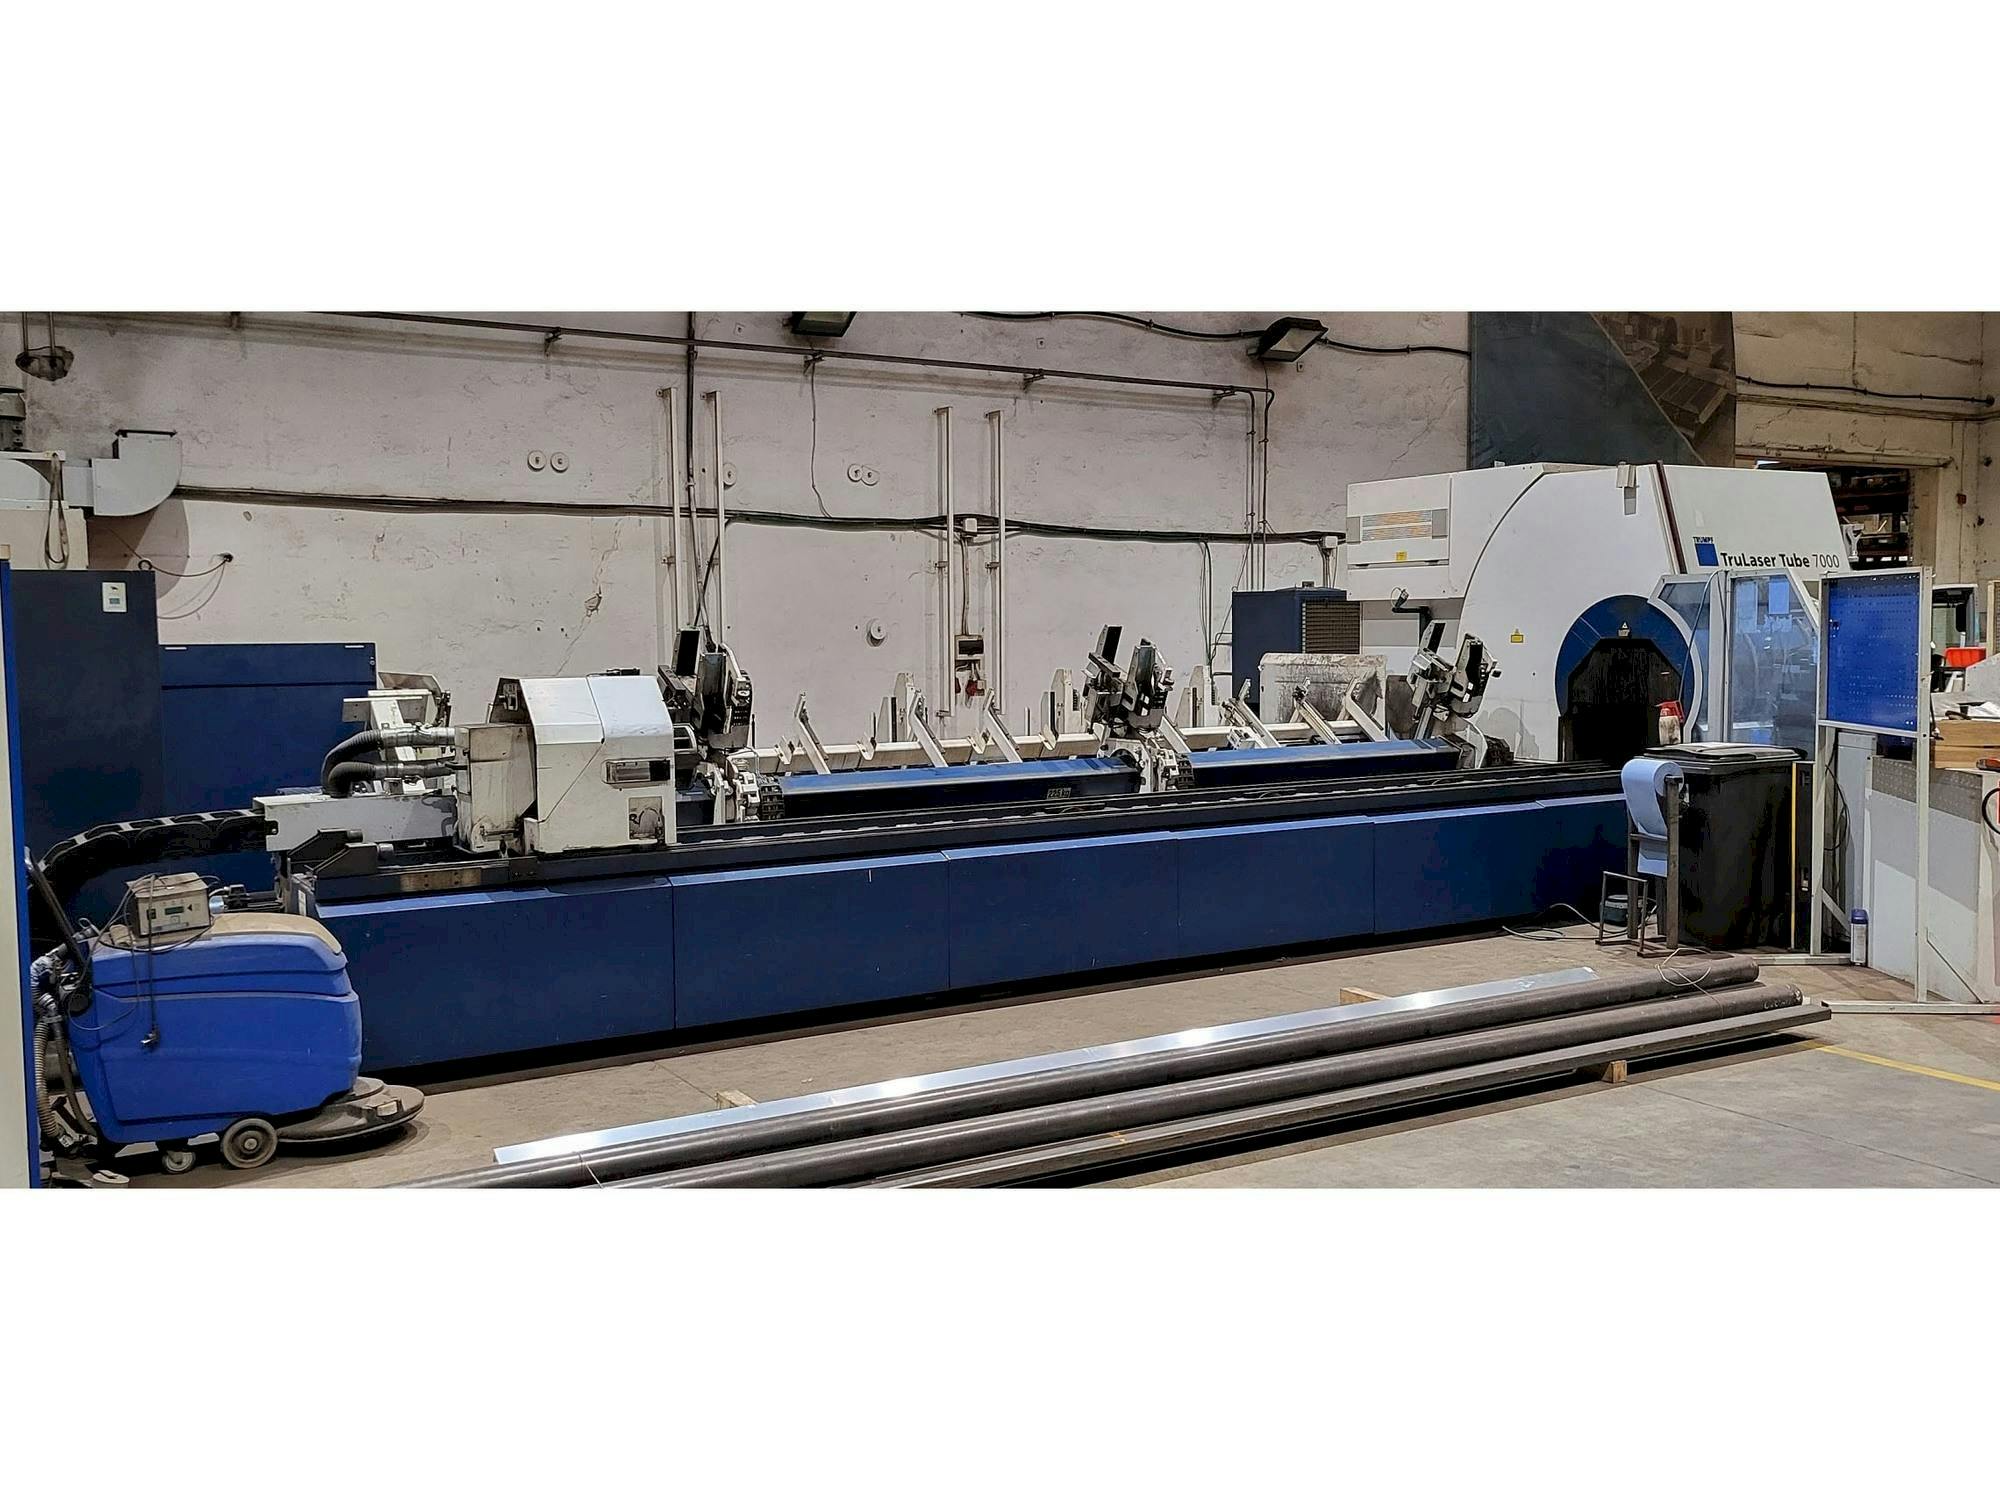 Front view of Trumpf TruLaser Tube 7000  machine